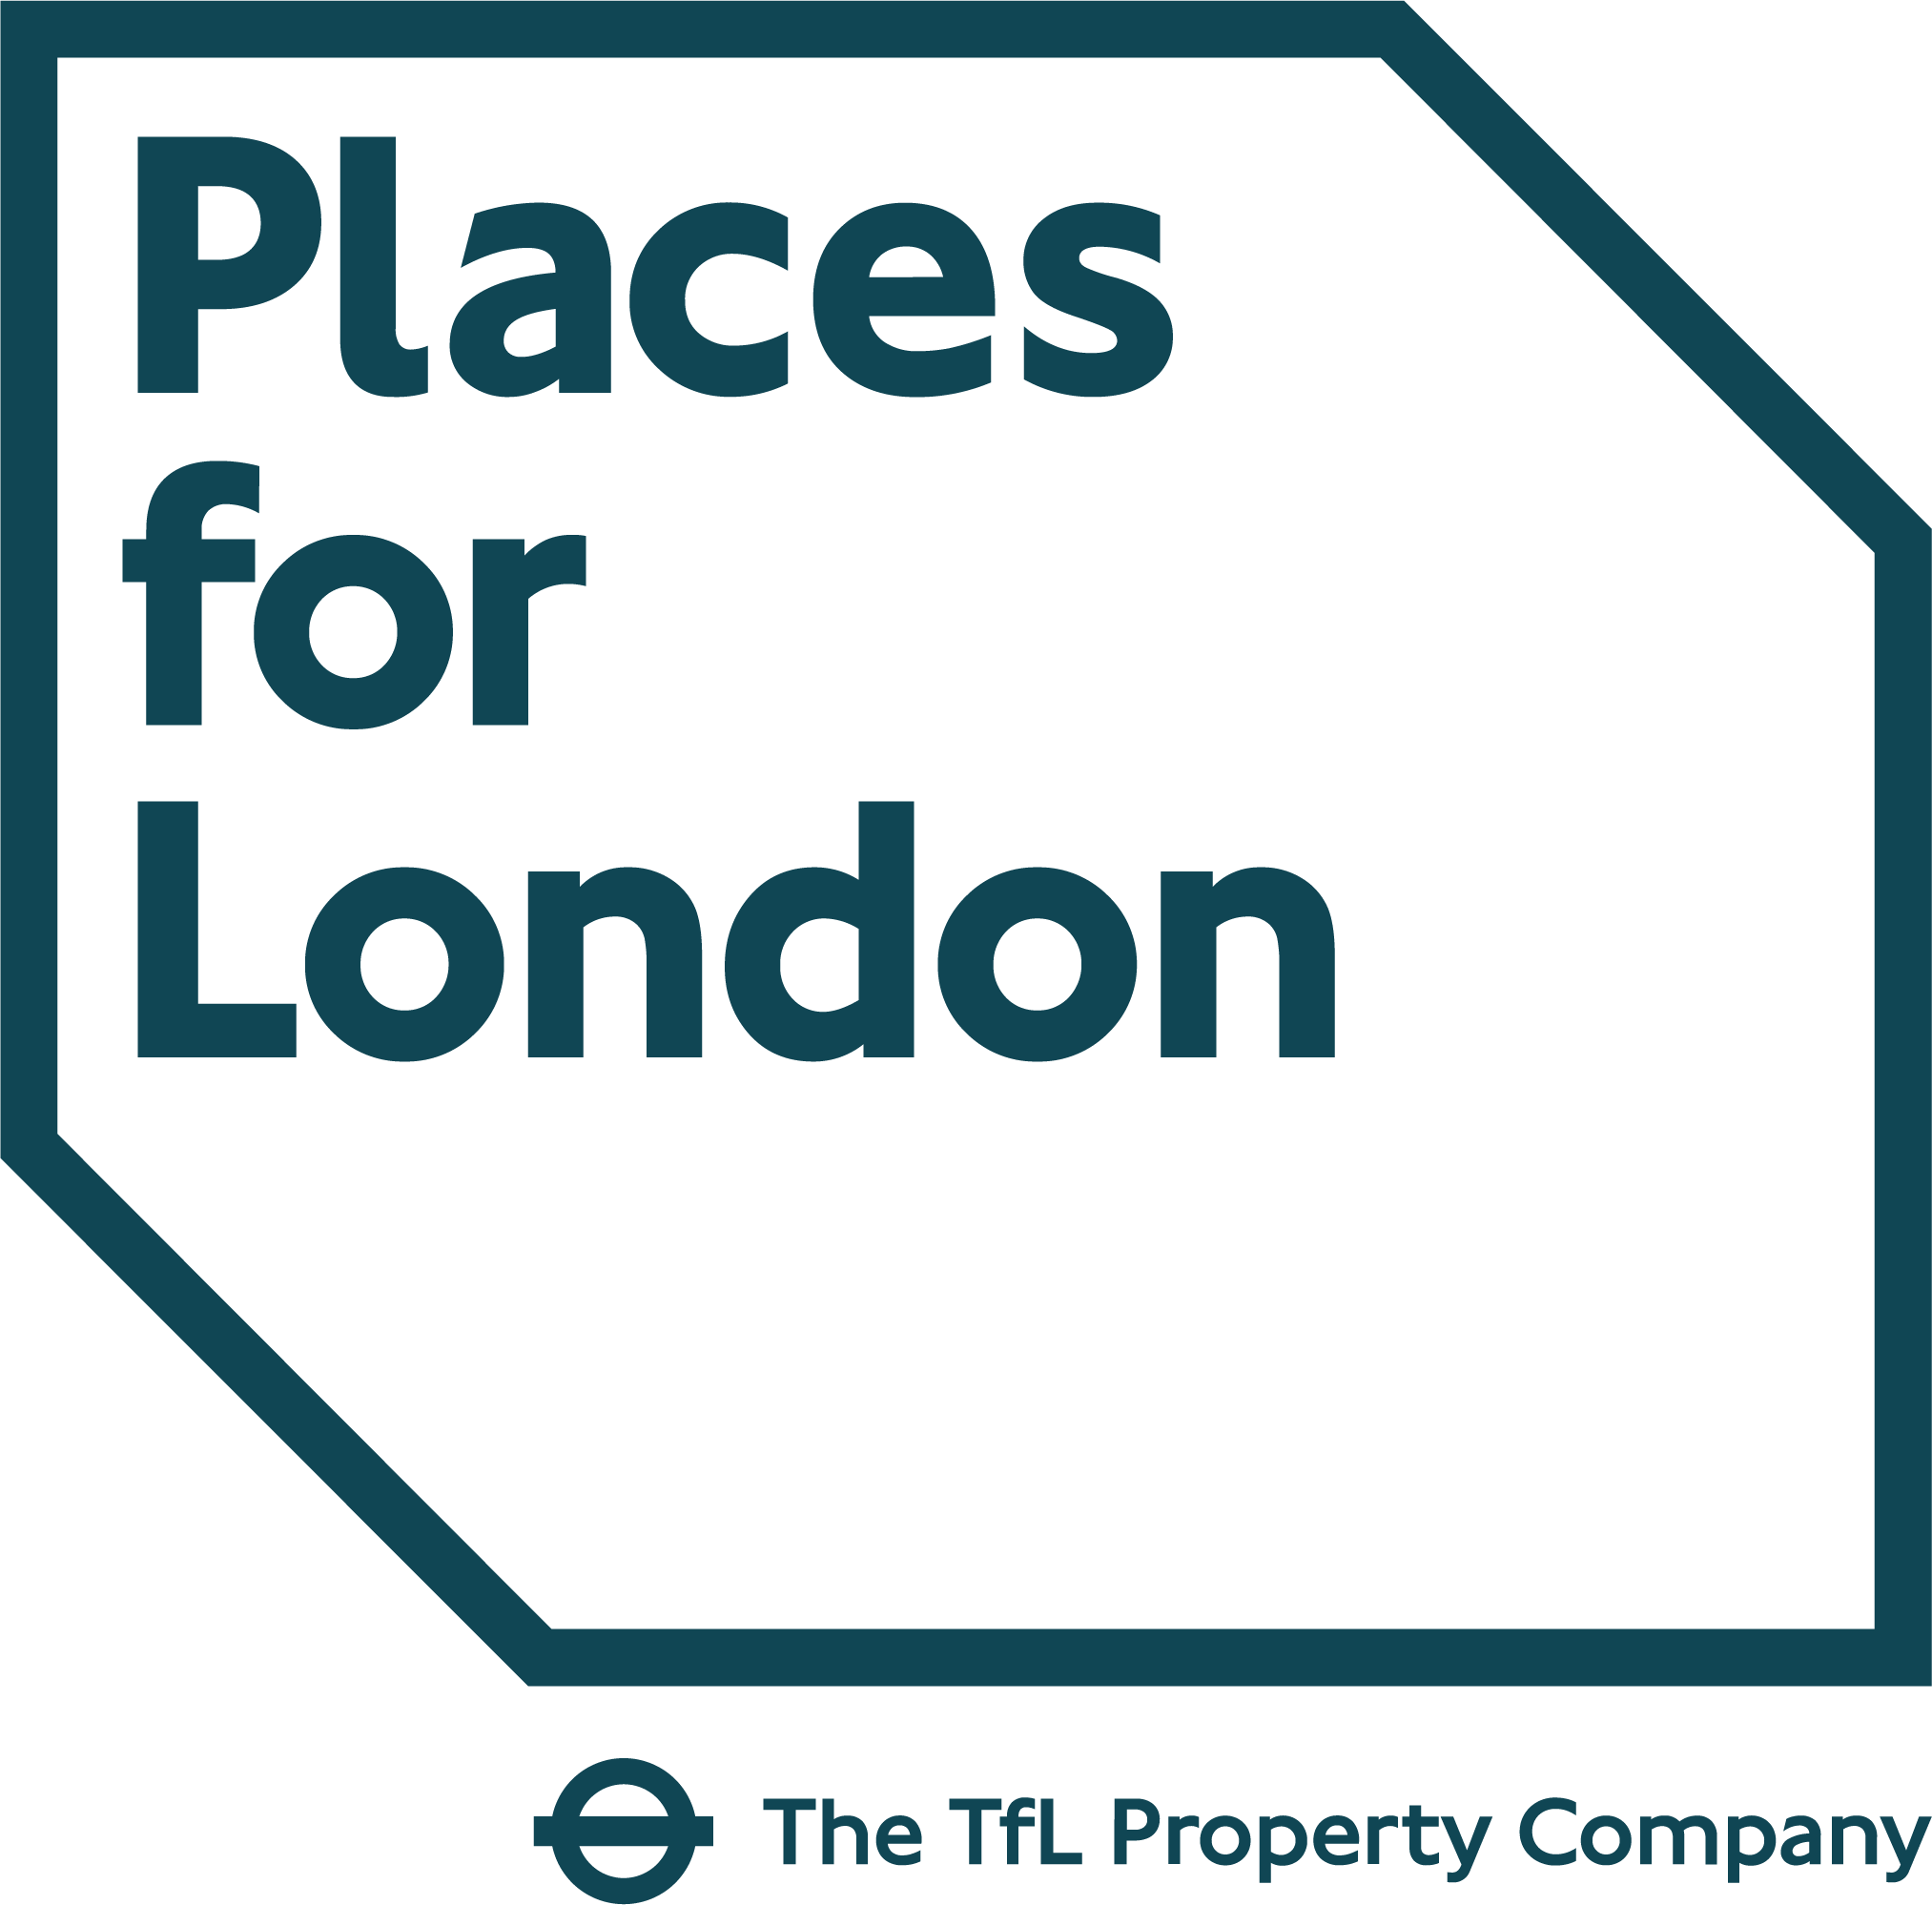 Places for London Logo